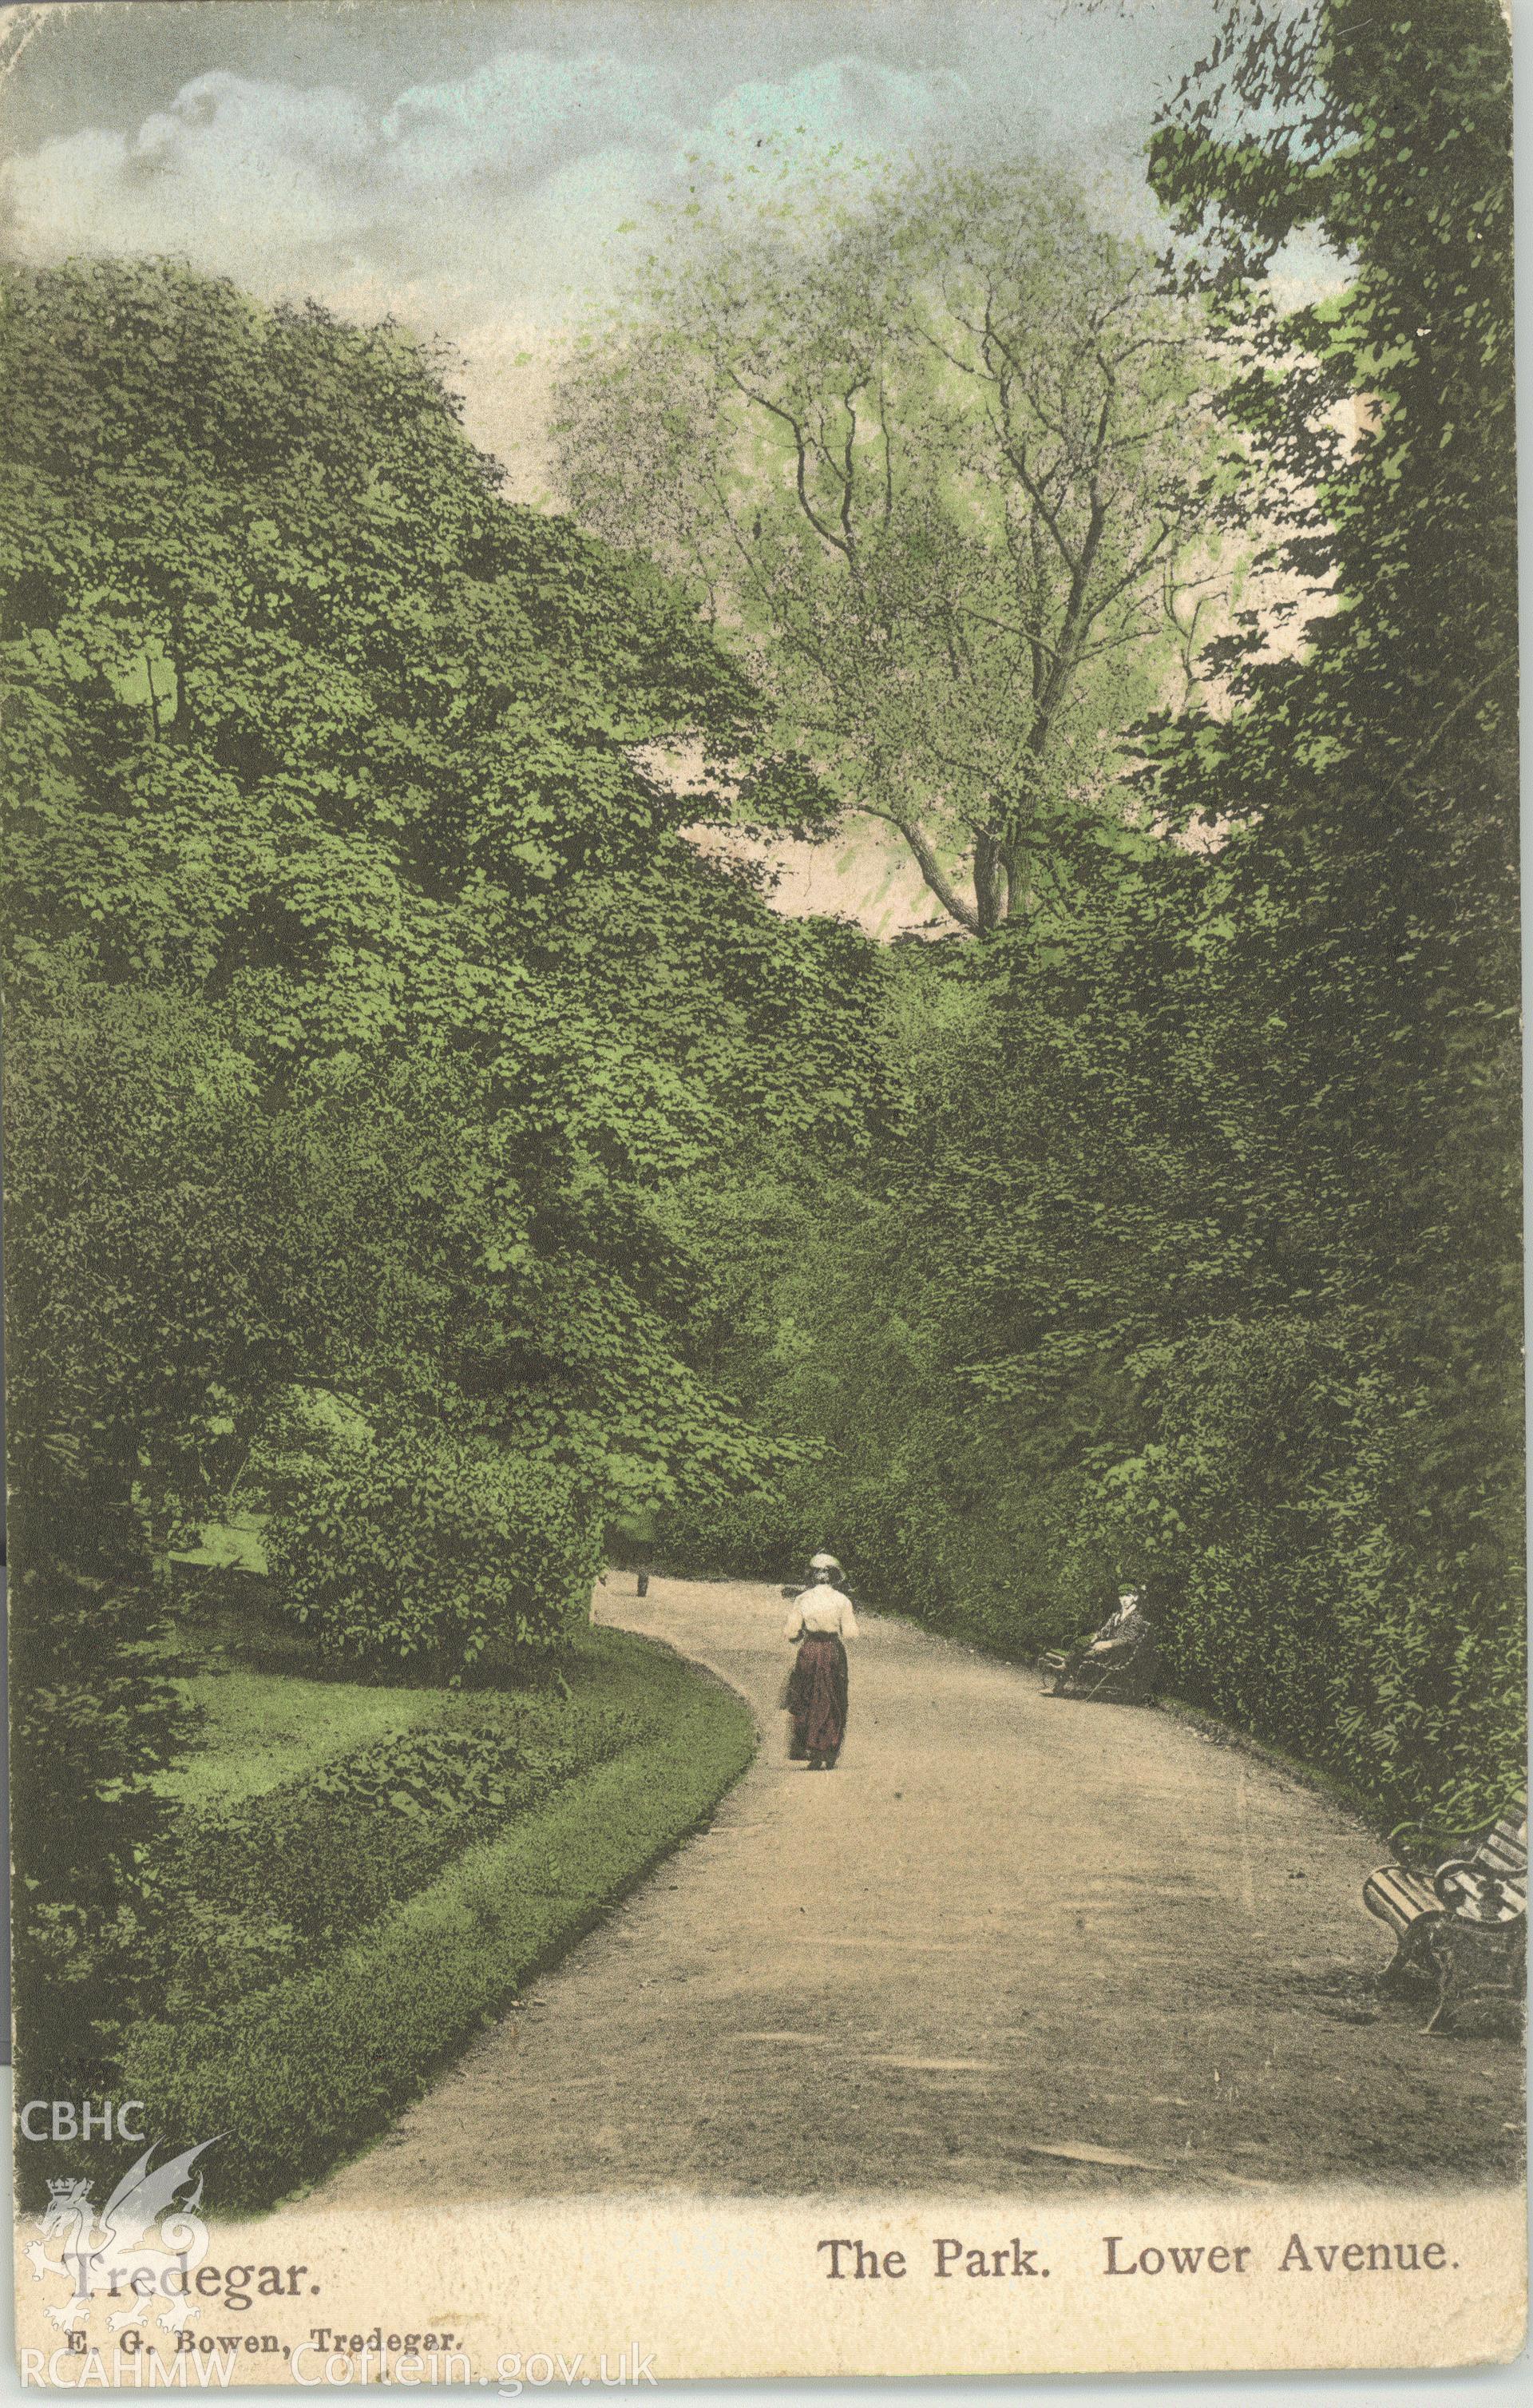 Digitised postcard image of Lower Avenue, Bedwellty Park, Tredegar, E.G. Bowen, 22 Commercial Street, Tredegar. Produced by Parks and Gardens Data Services, from an original item in the Peter Davis Collection at Parks and Gardens UK. We hold only web-resolution images of this collection, suitable for viewing on screen and for research purposes only. We do not hold the original images, or publication quality scans.